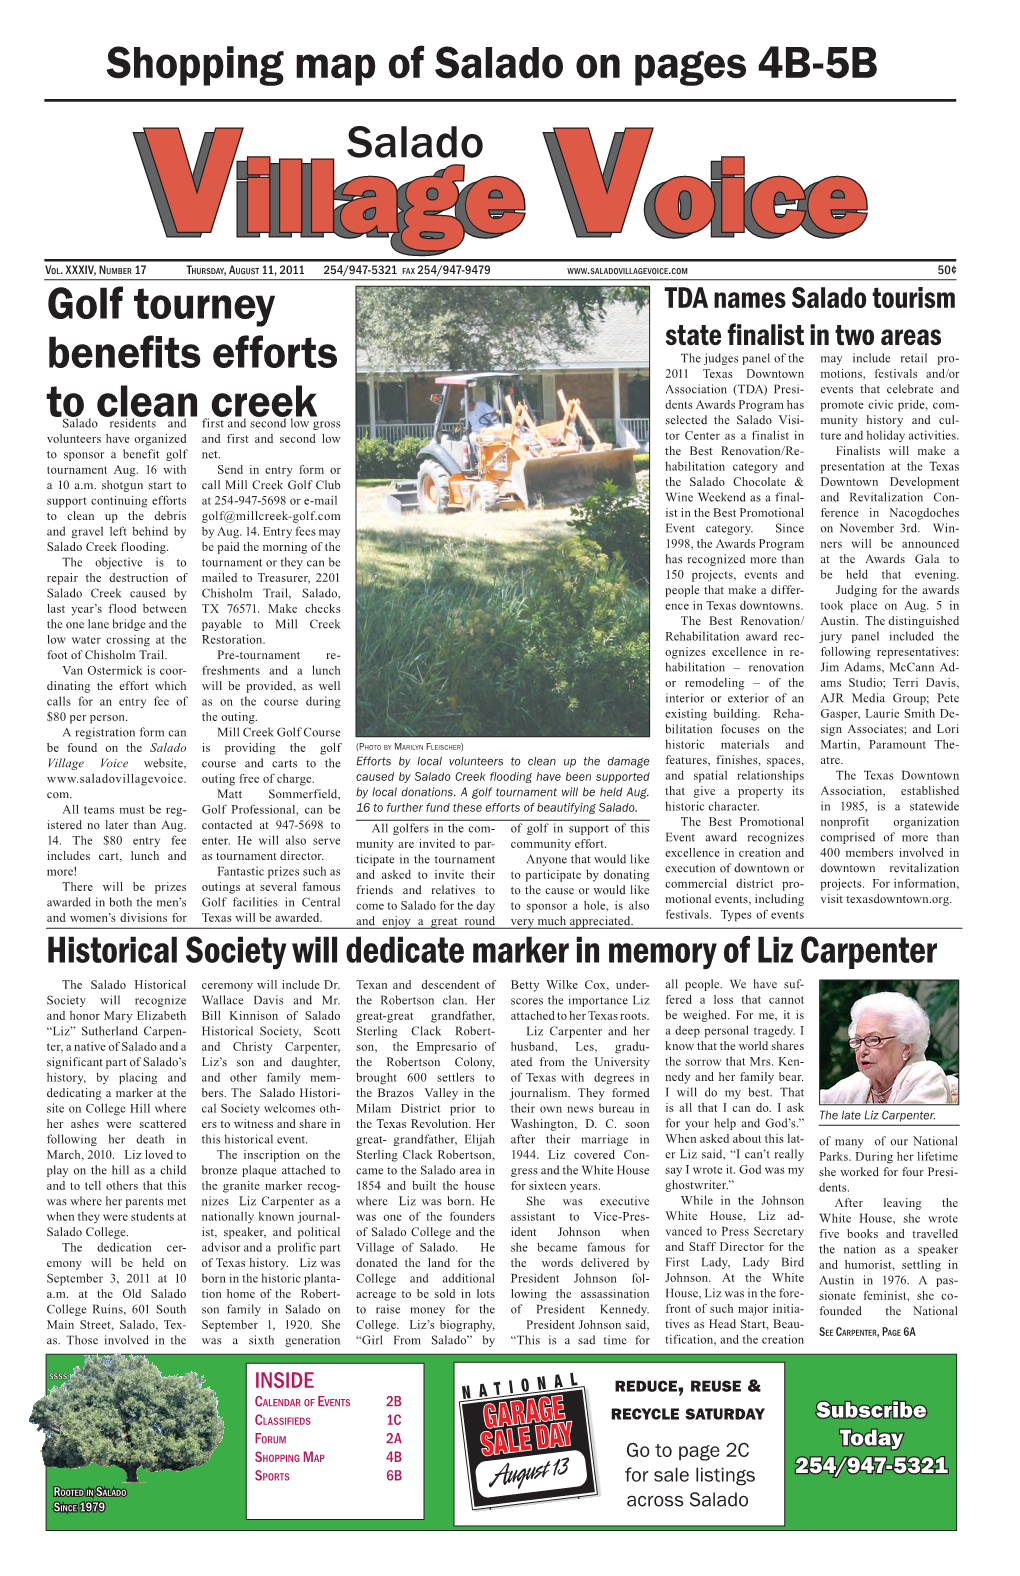 Salado Shopping Map of Salado on Pages 4B-5B Golf Tourney Benefits Efforts to Clean Creek